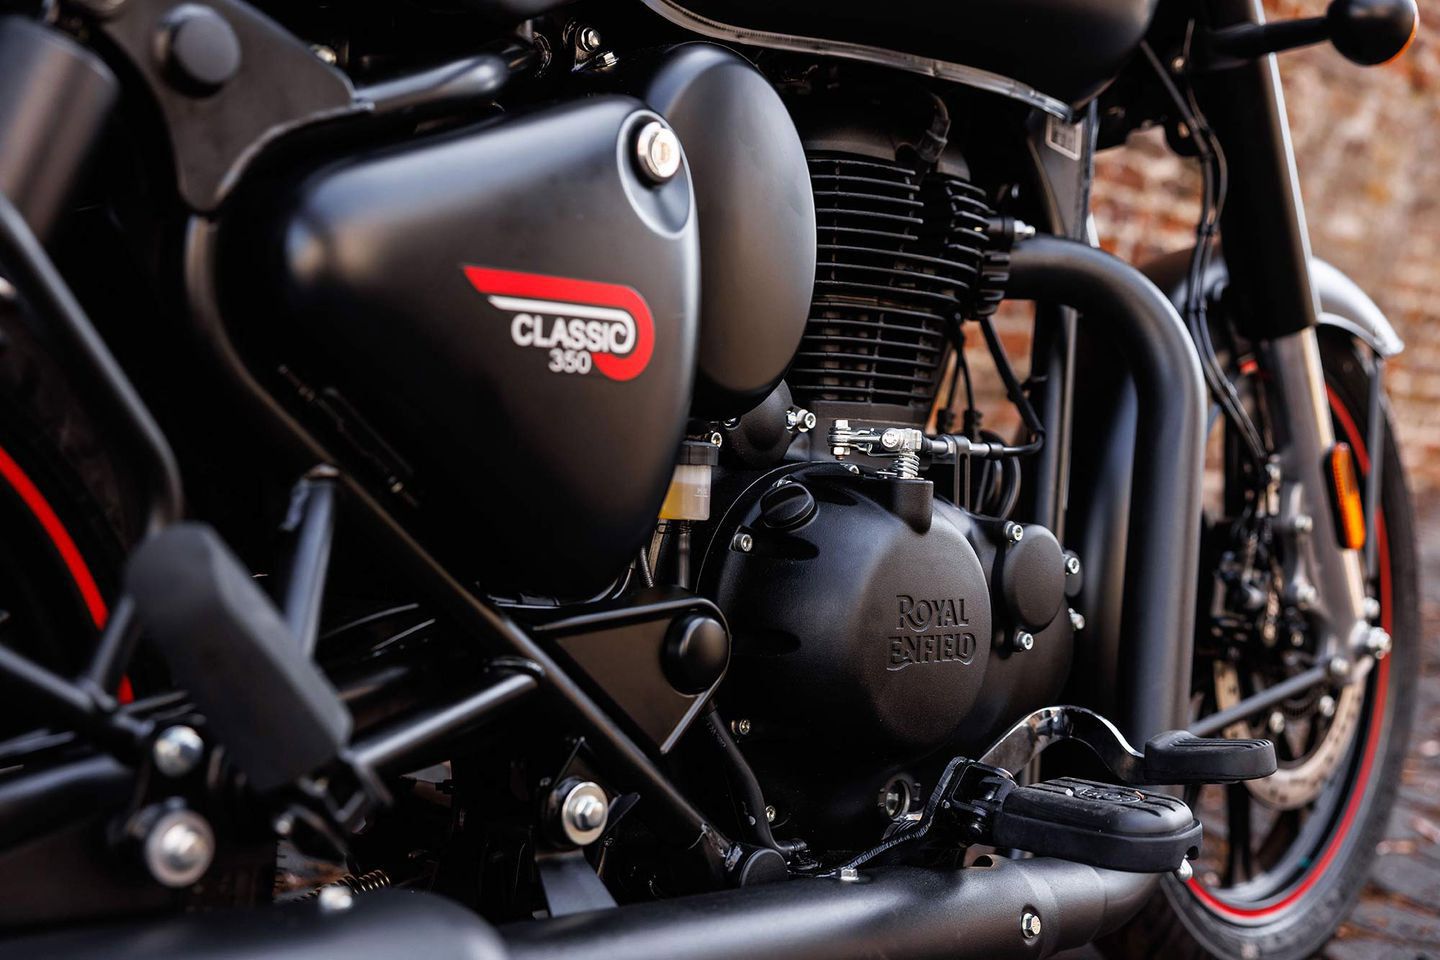 The Classic 350 is powered by the same air/oil-cooled 349cc SOHC powerplant as seen in the Royal Enfield Meteor 350, which we’ve become fond of for its gradual power delivery and gentle personality.